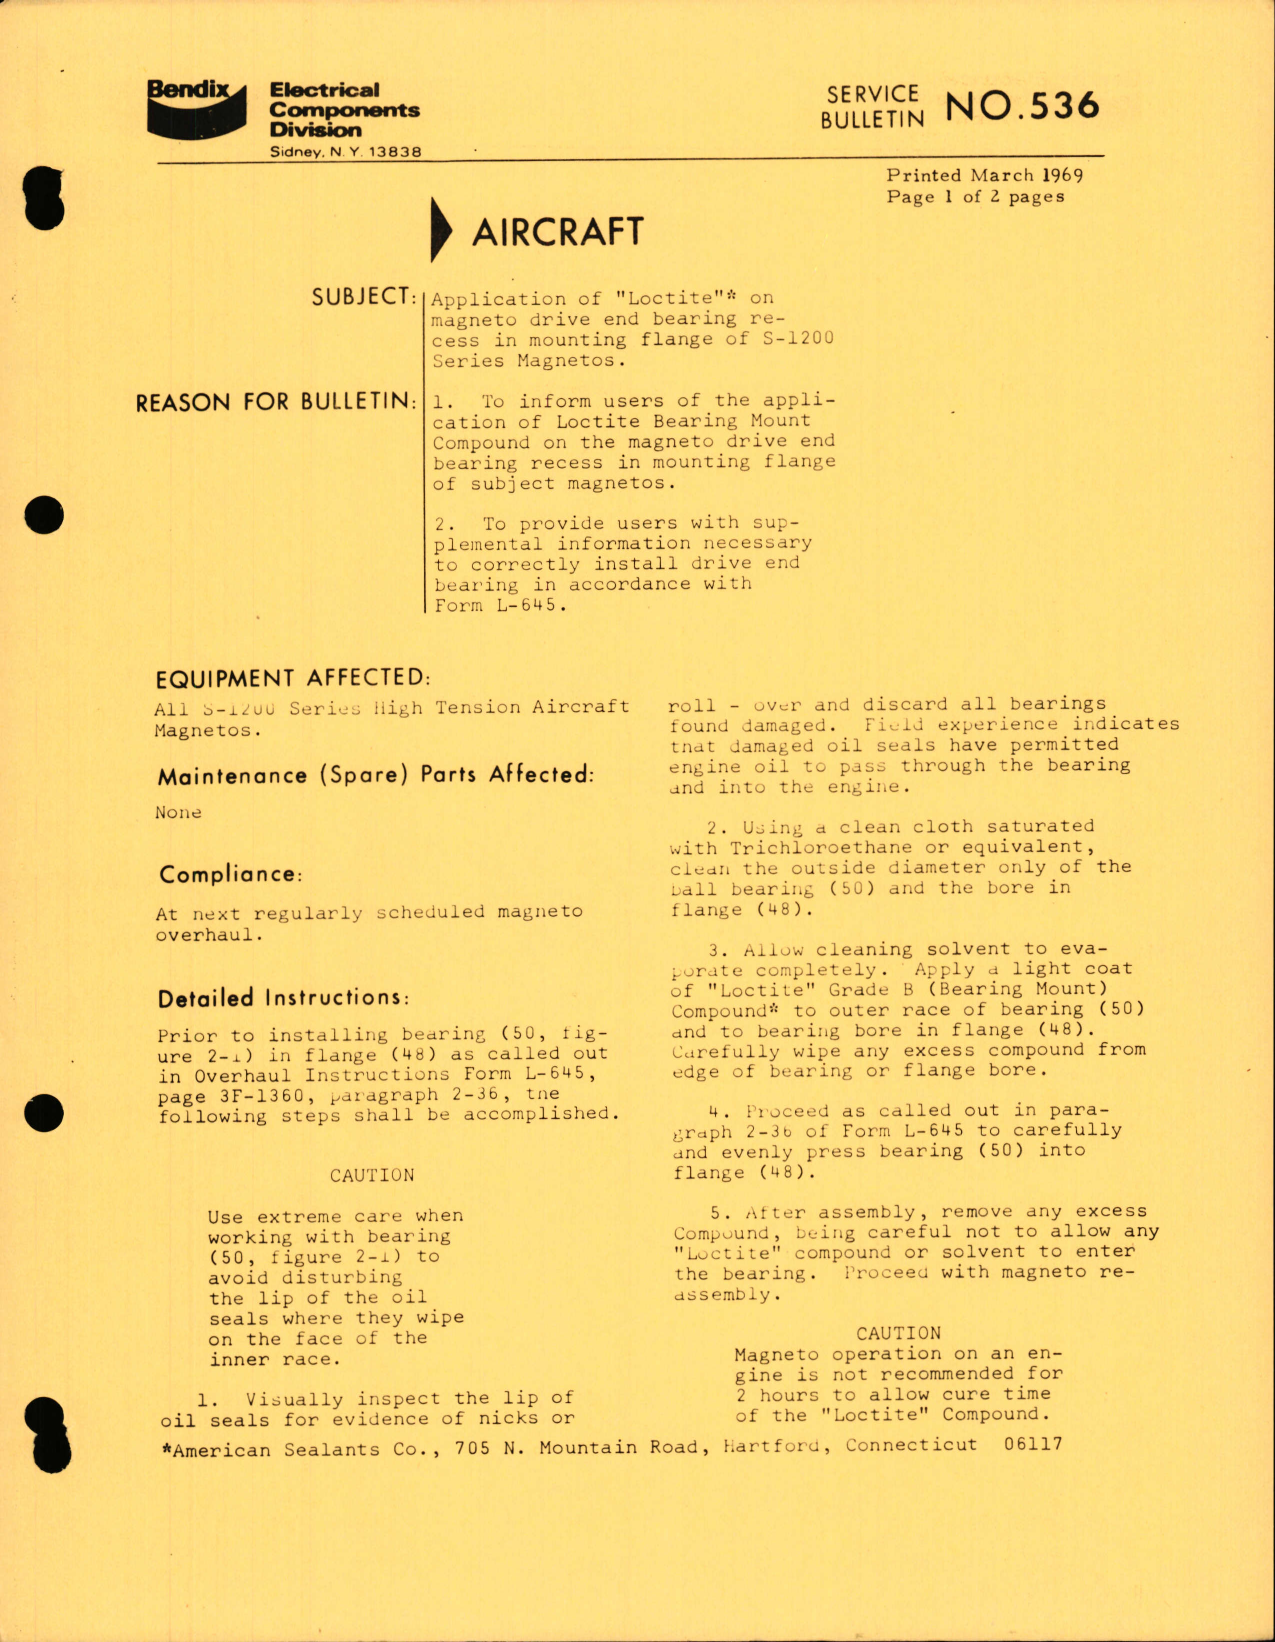 Sample page 1 from AirCorps Library document: Application of 